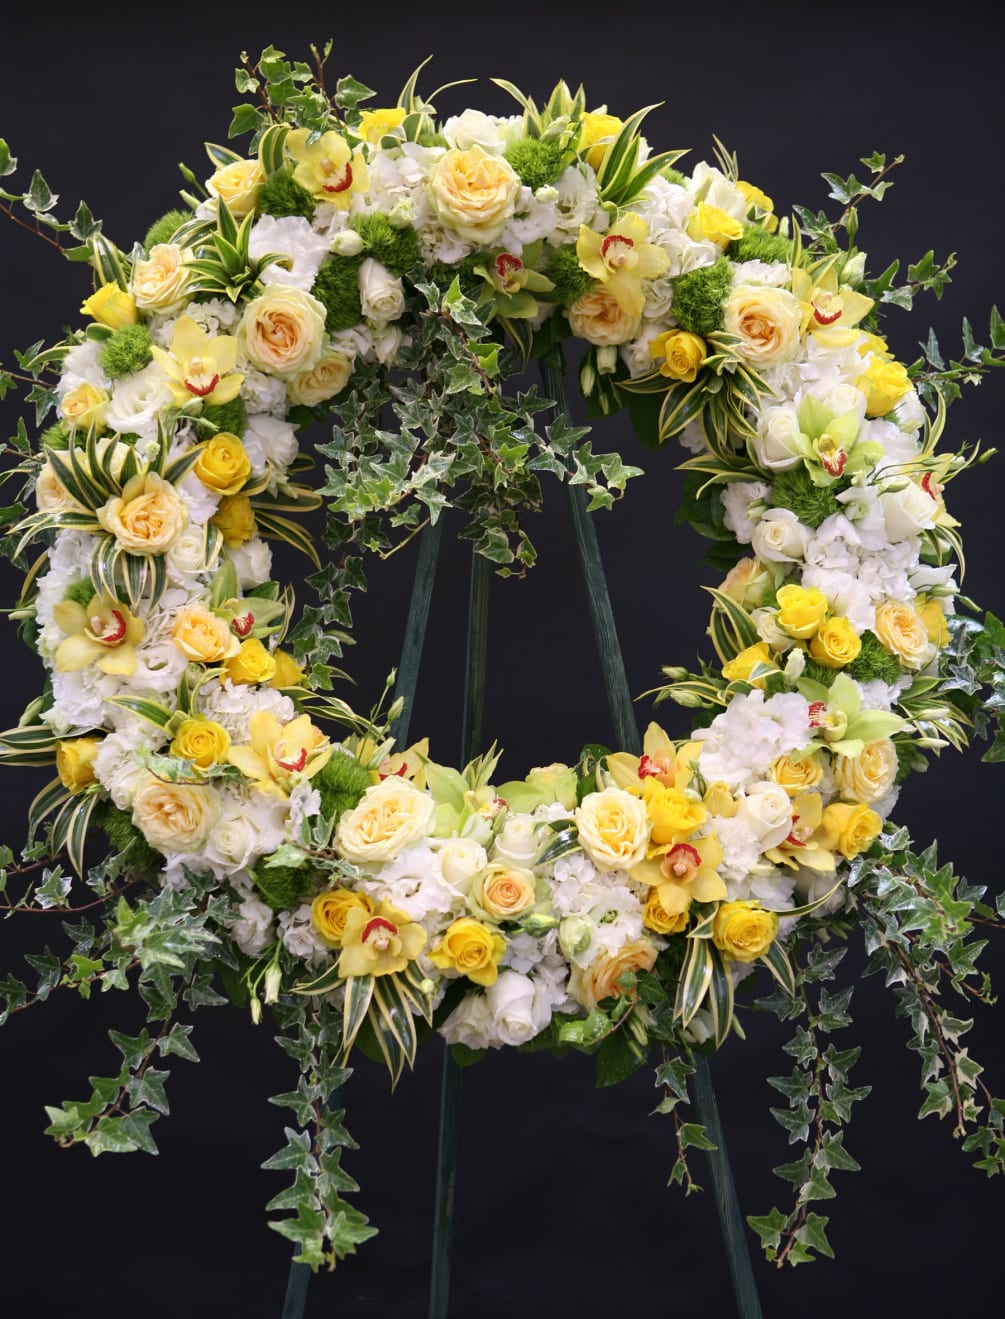 Grand sympathy wreath composed of yellow and white roses, cymbidium orchids, moss